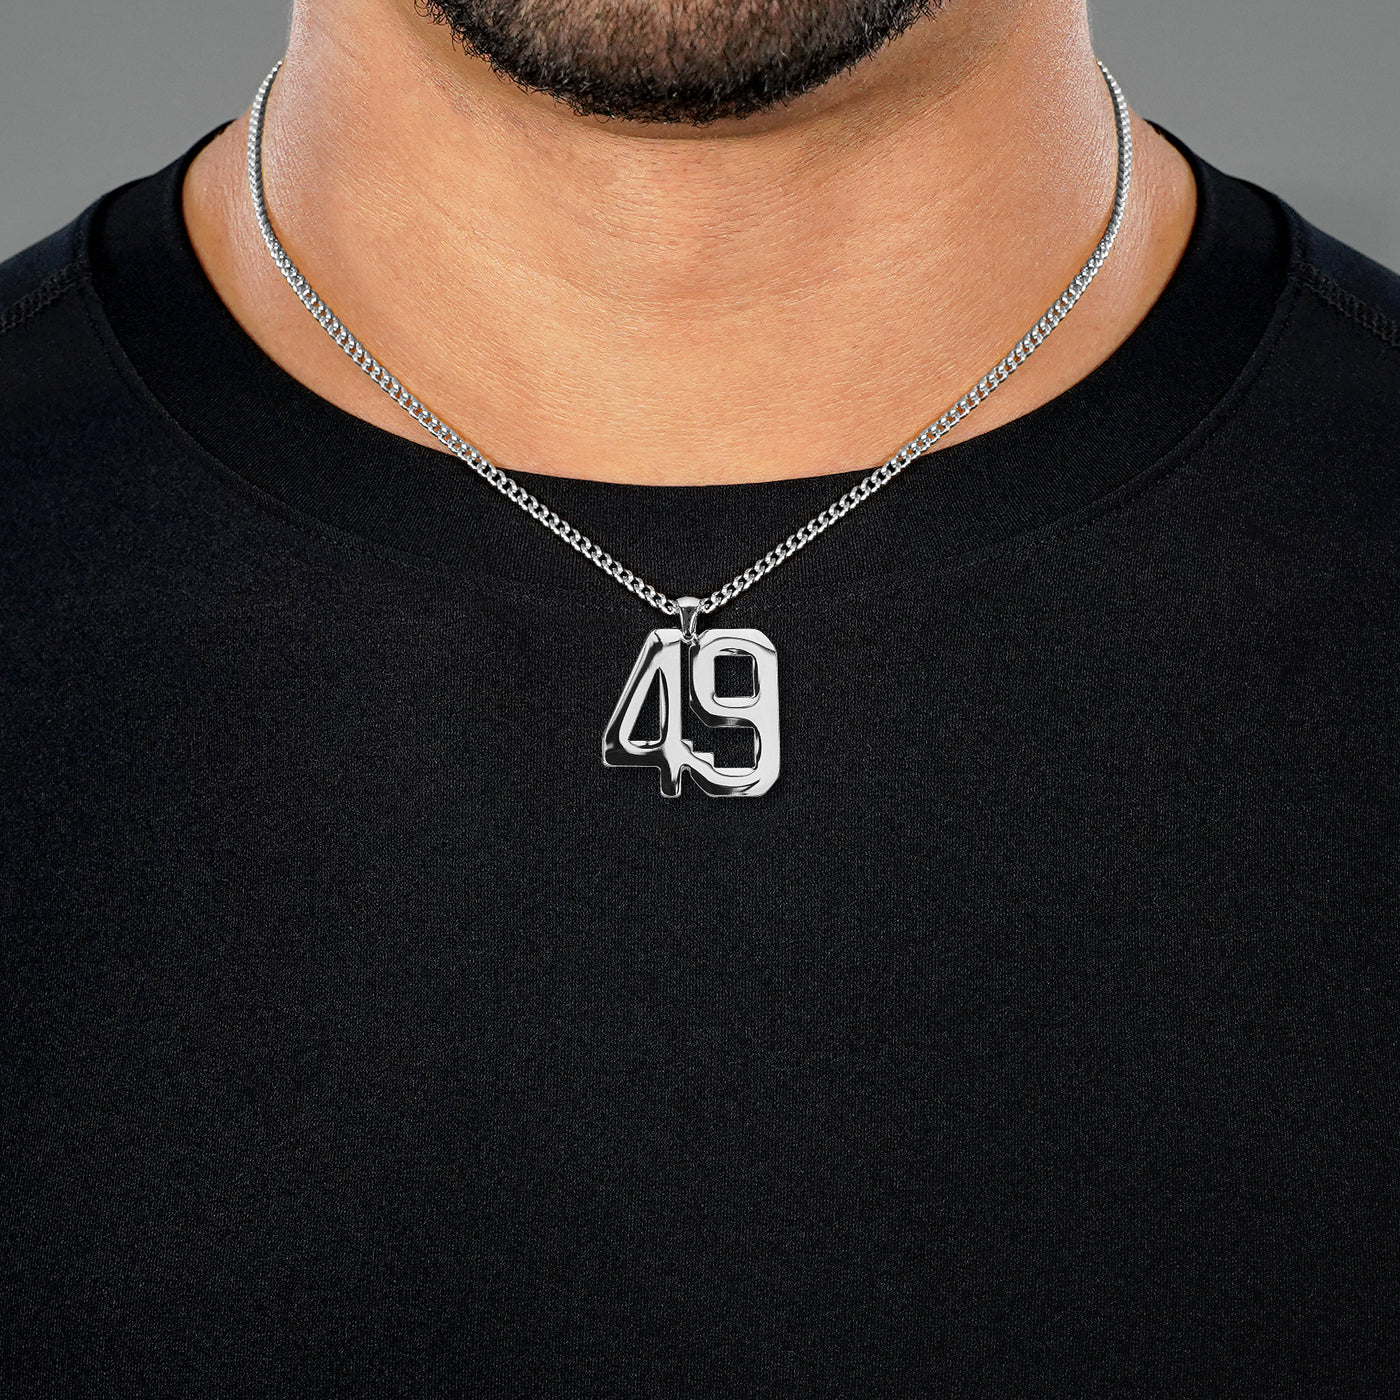 49 Number Pendant with Chain Necklace - Stainless Steel